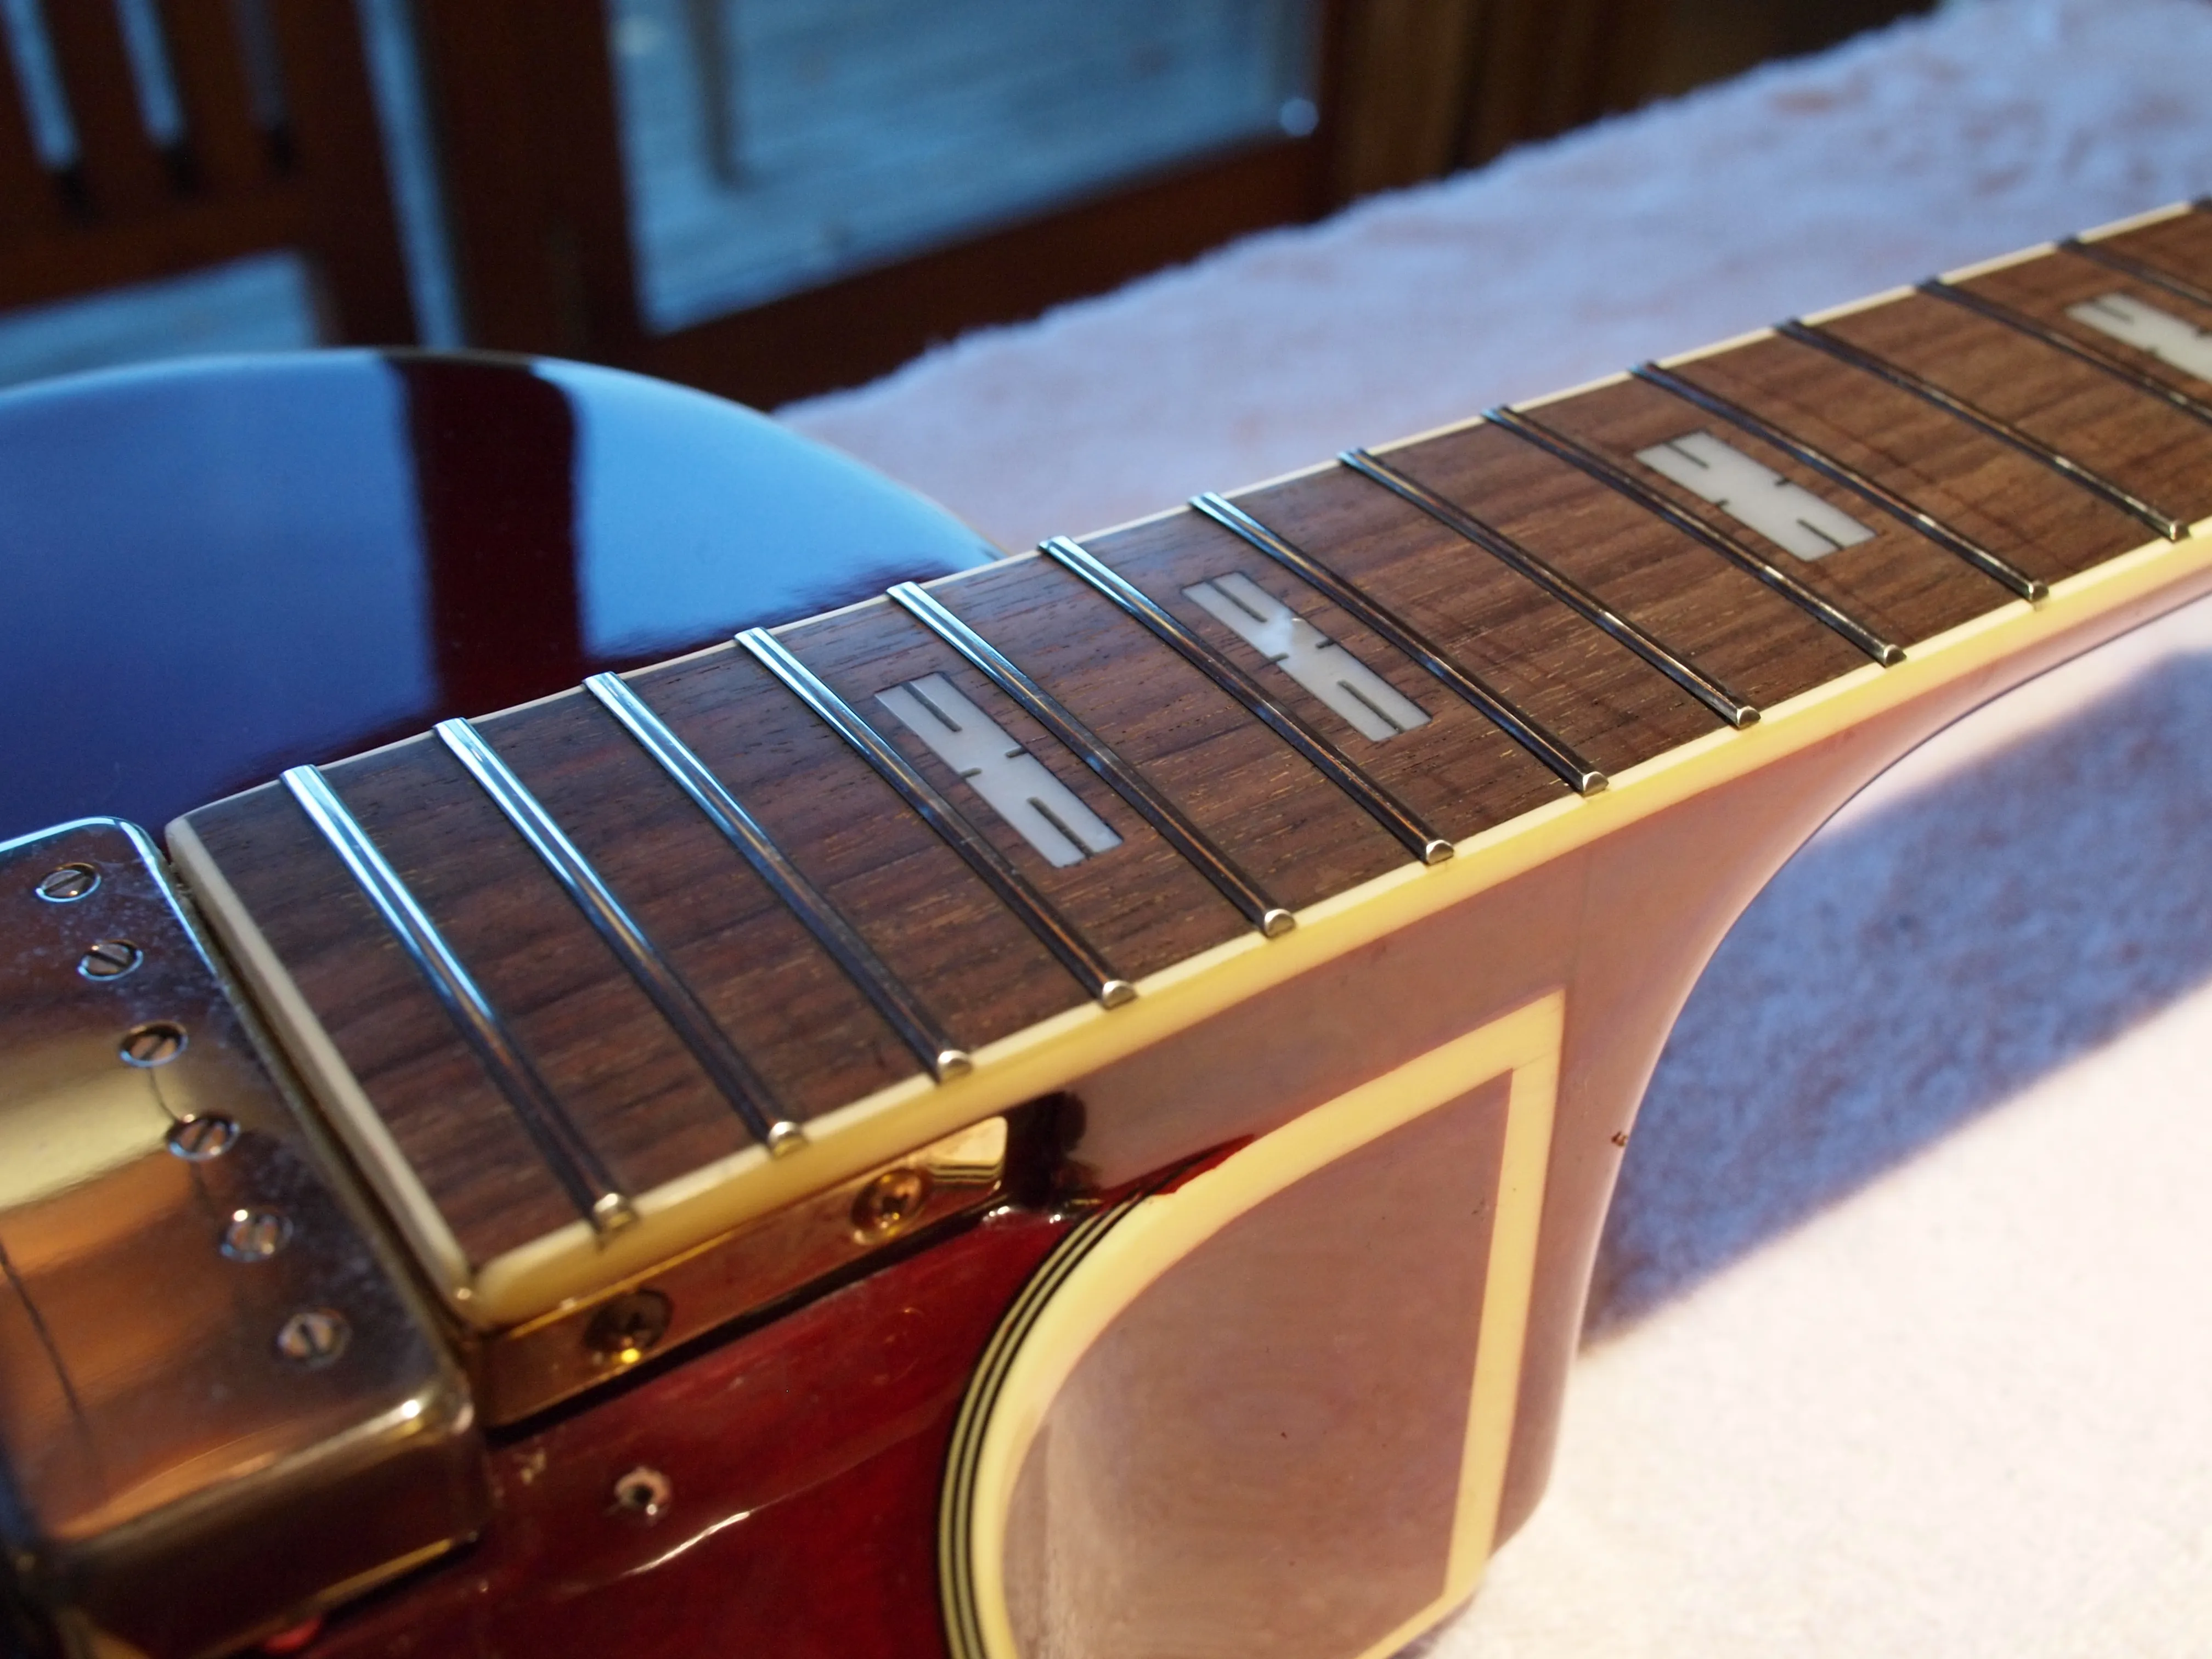 Beautiful shiny polished frets.  A little lemon oil will be rubbed on the rosewood fretboard before restringing.